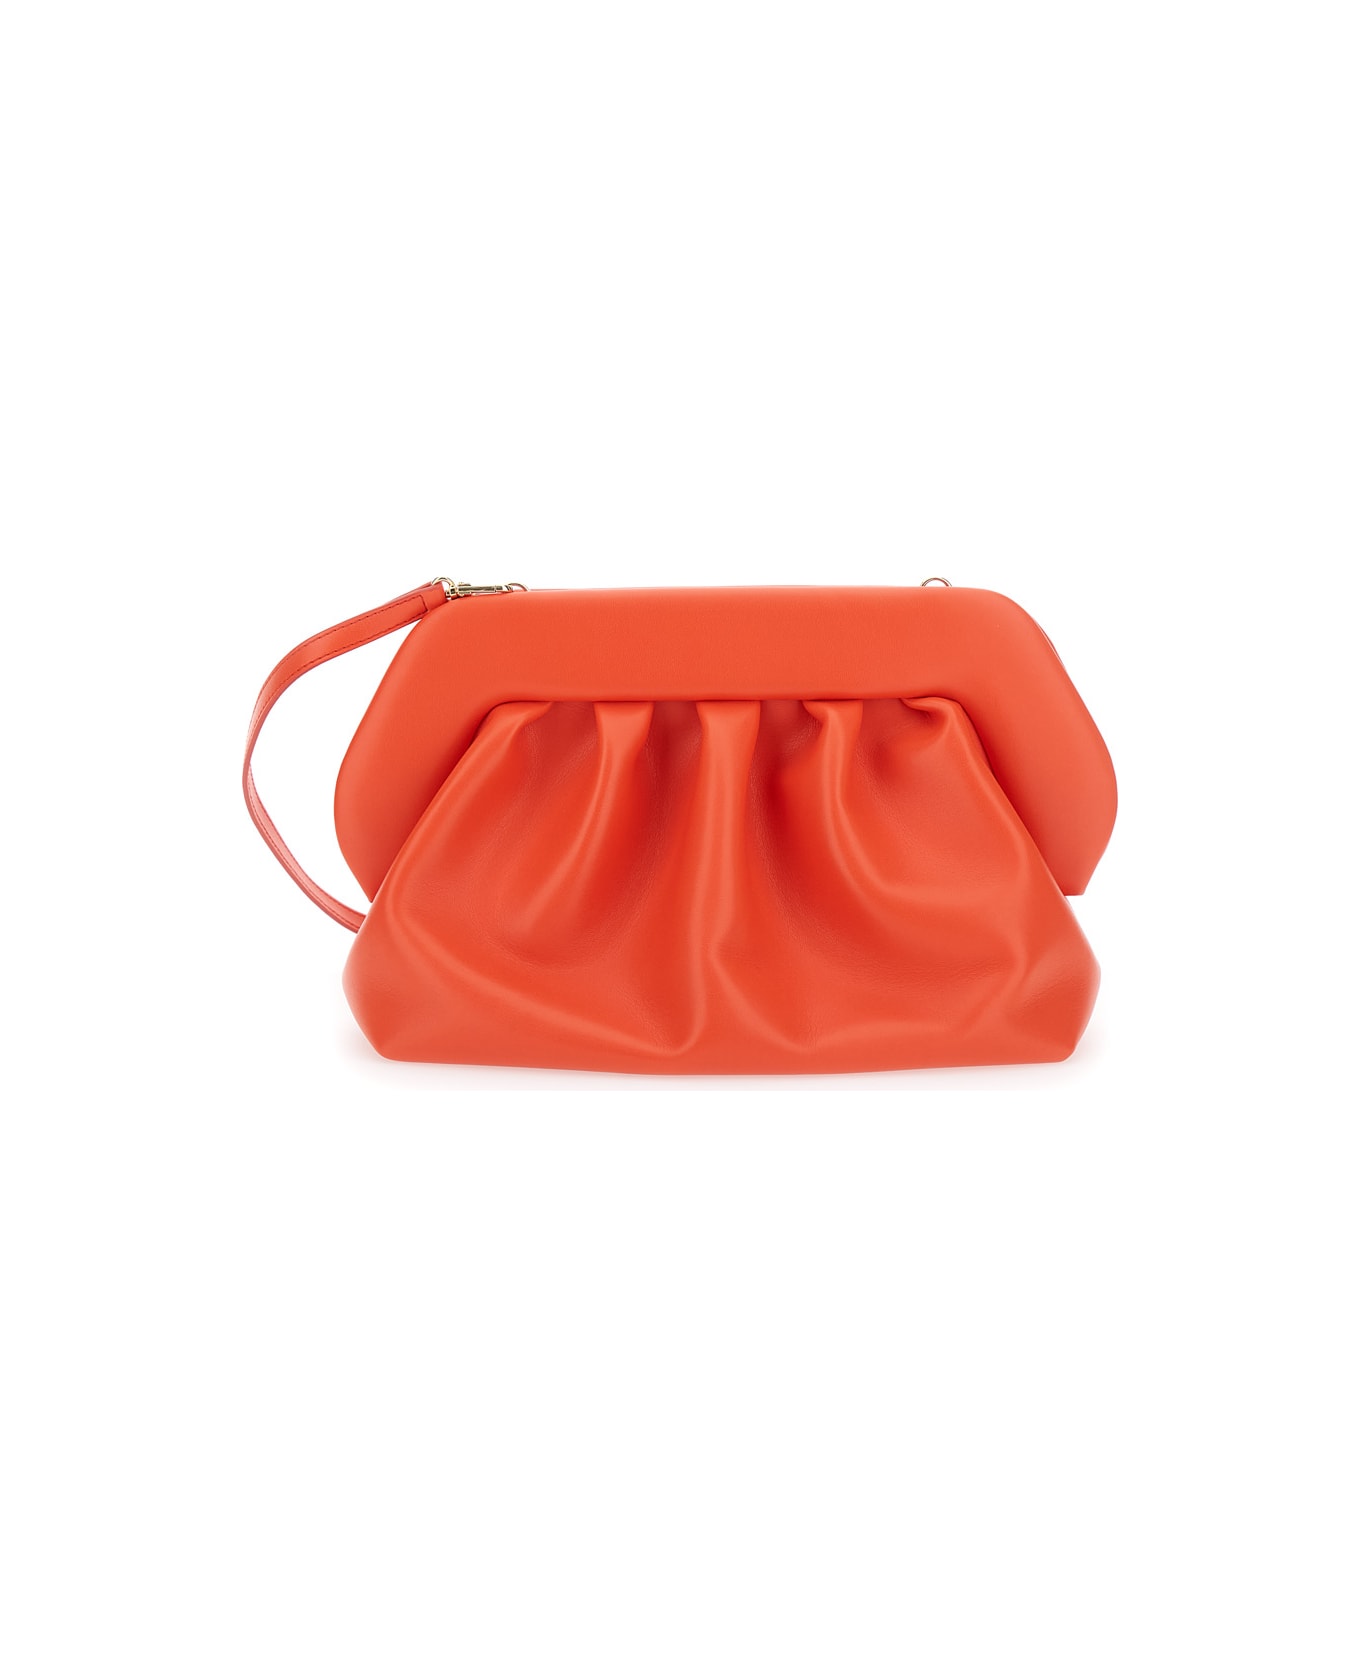 THEMOIRè Orange Clutch Bag With Magnetic Closure In Eco Leather Woman - Red クラッチバッグ